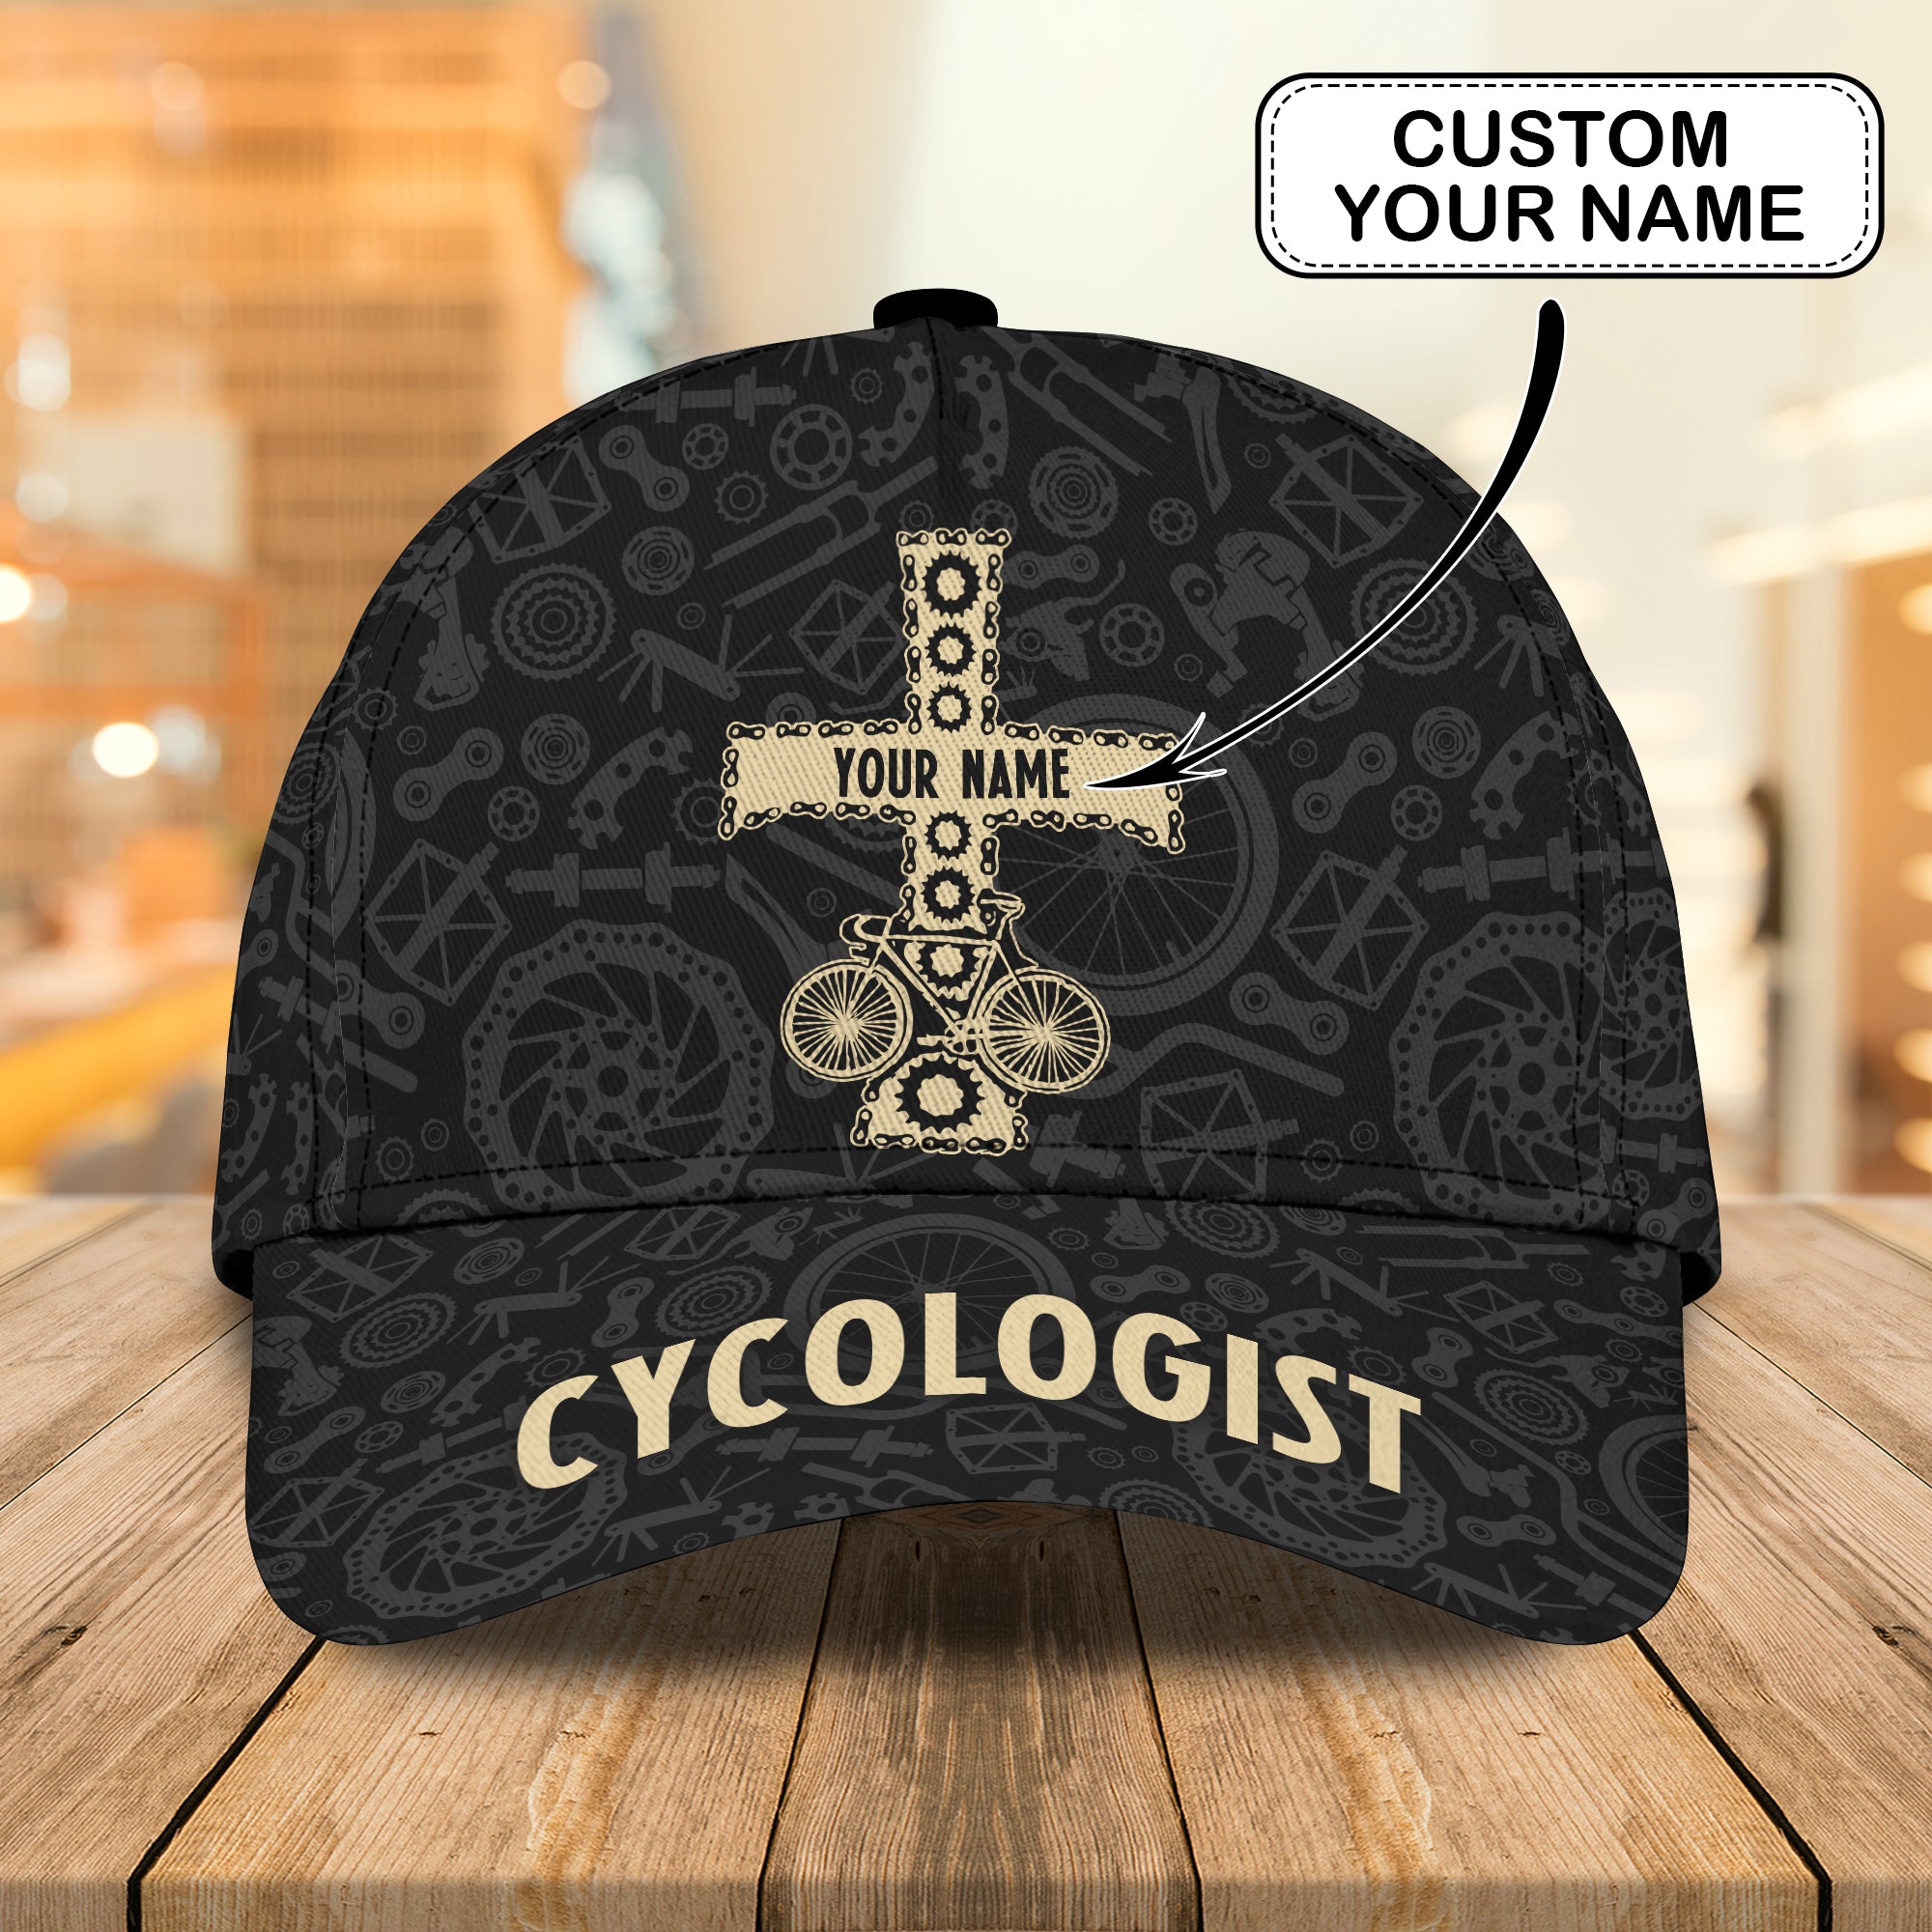 Cycologist - Personalized Name Cap - Vhv-cap-012